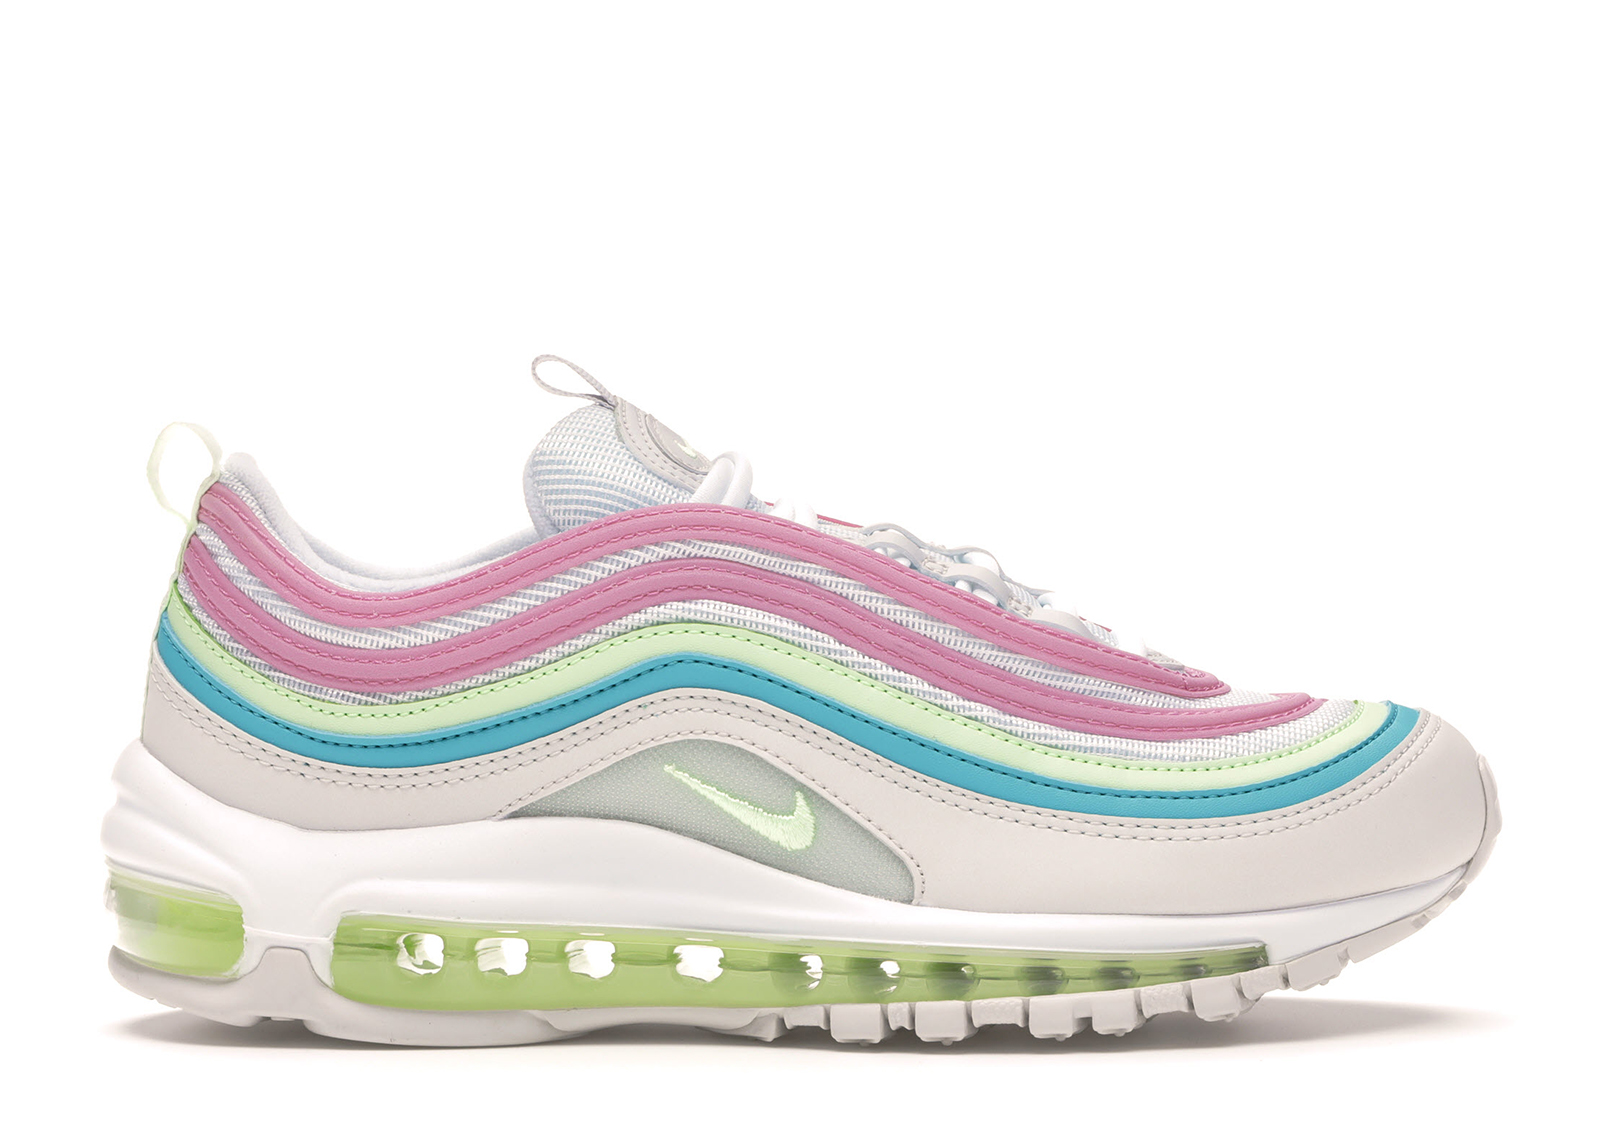 nike air max 97 summit white barely volt